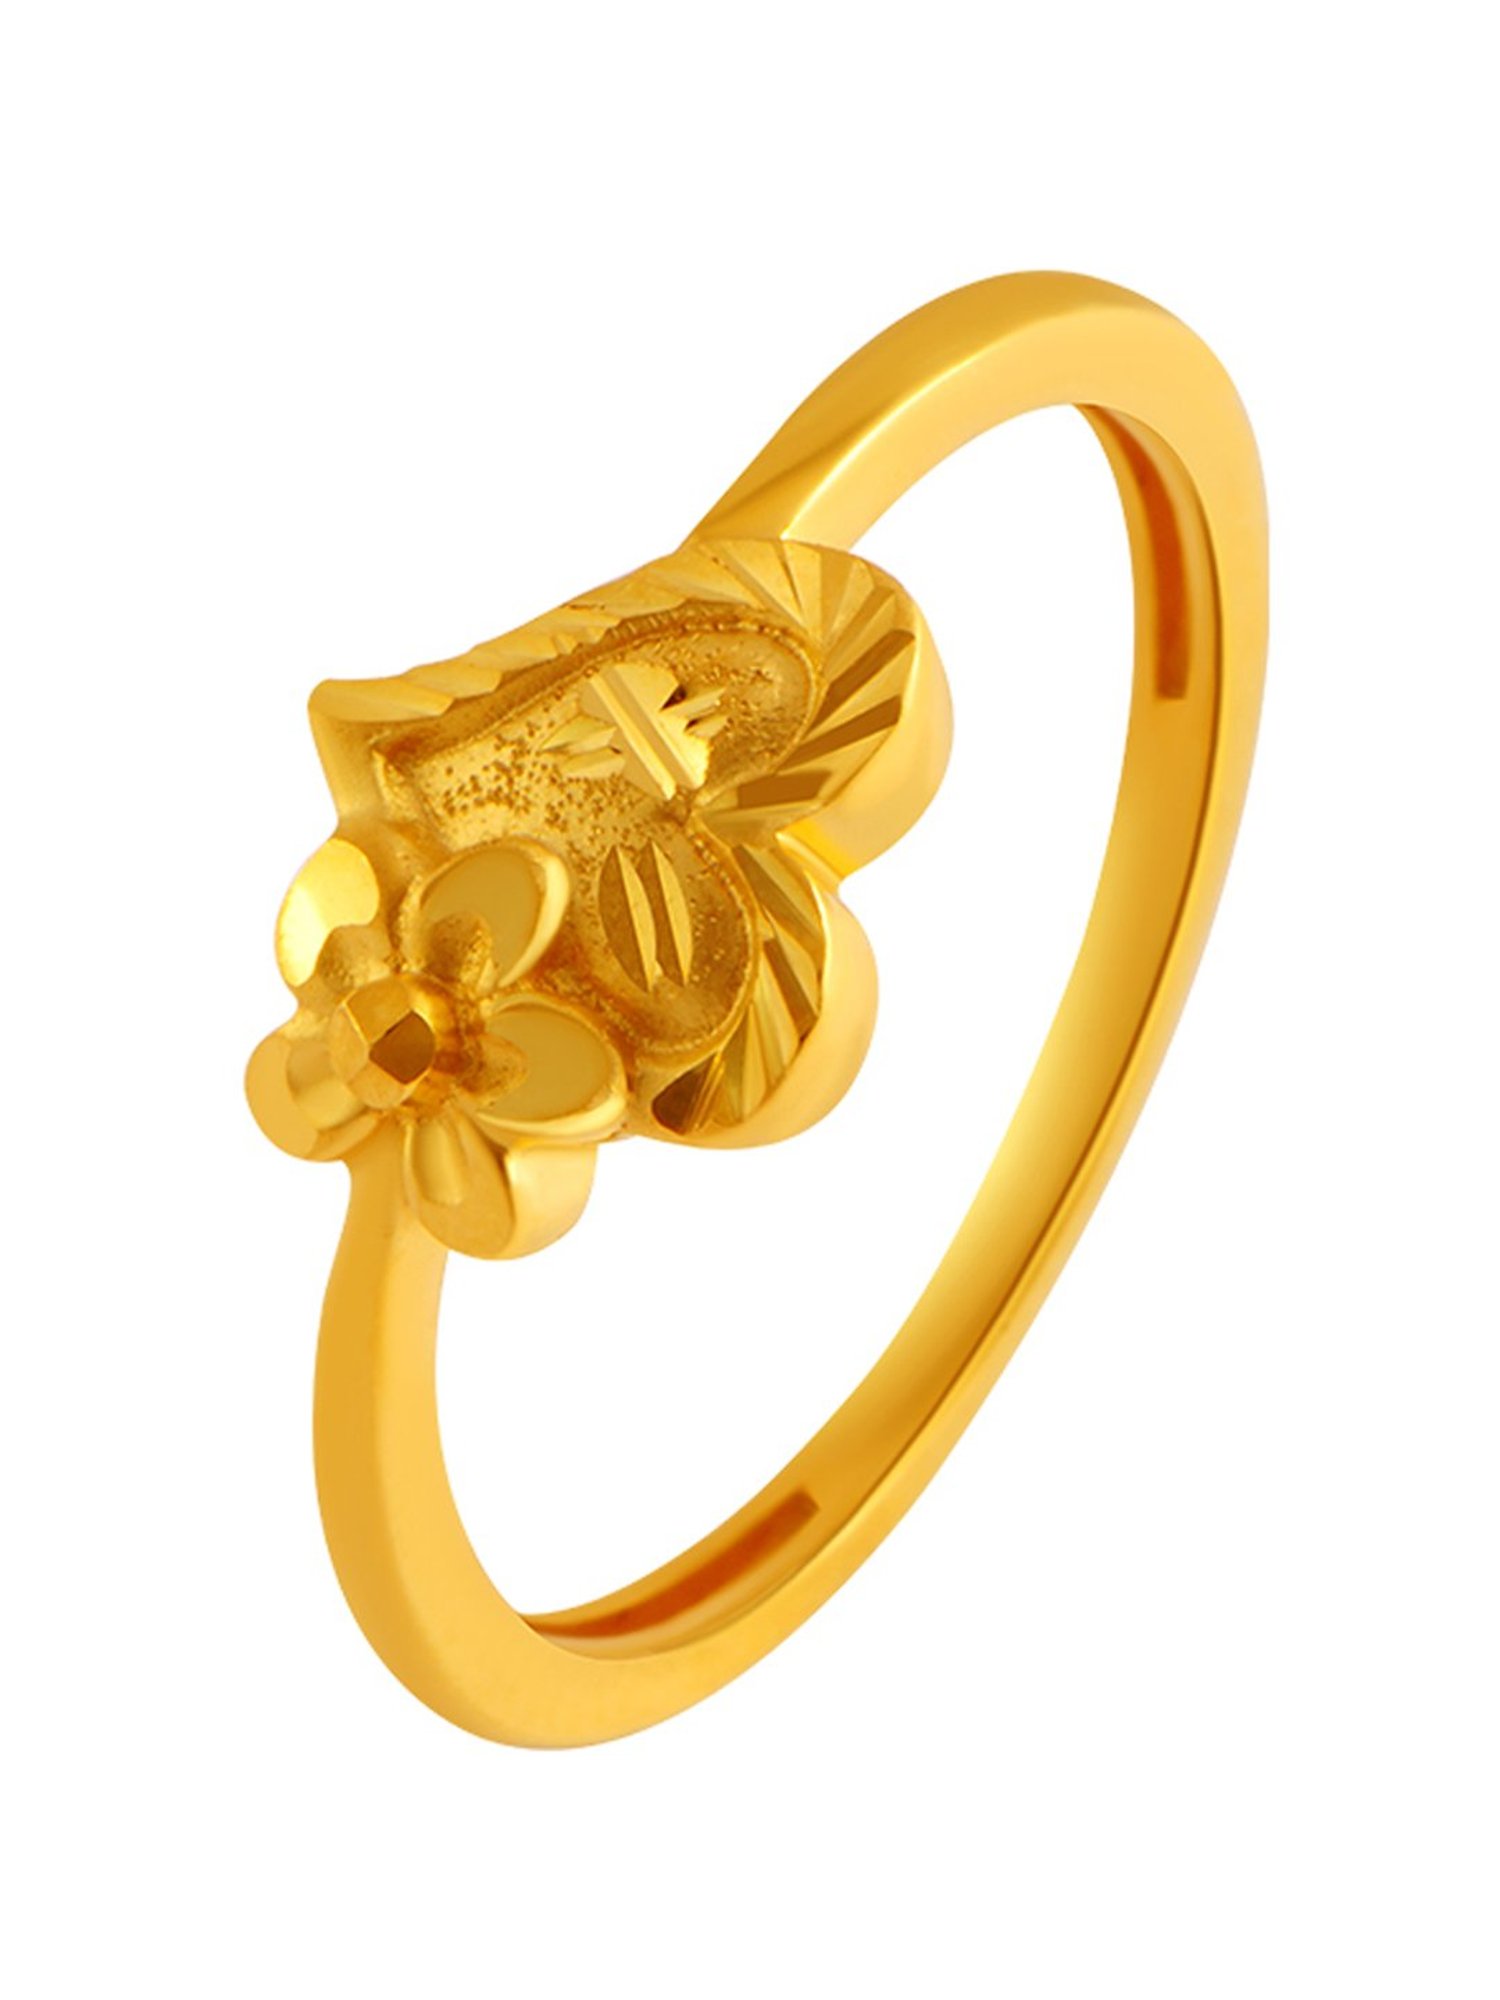 P.C. Chandra Jewellers 22k (916) Yellow Gold Ring for Women : Amazon.in:  Fashion